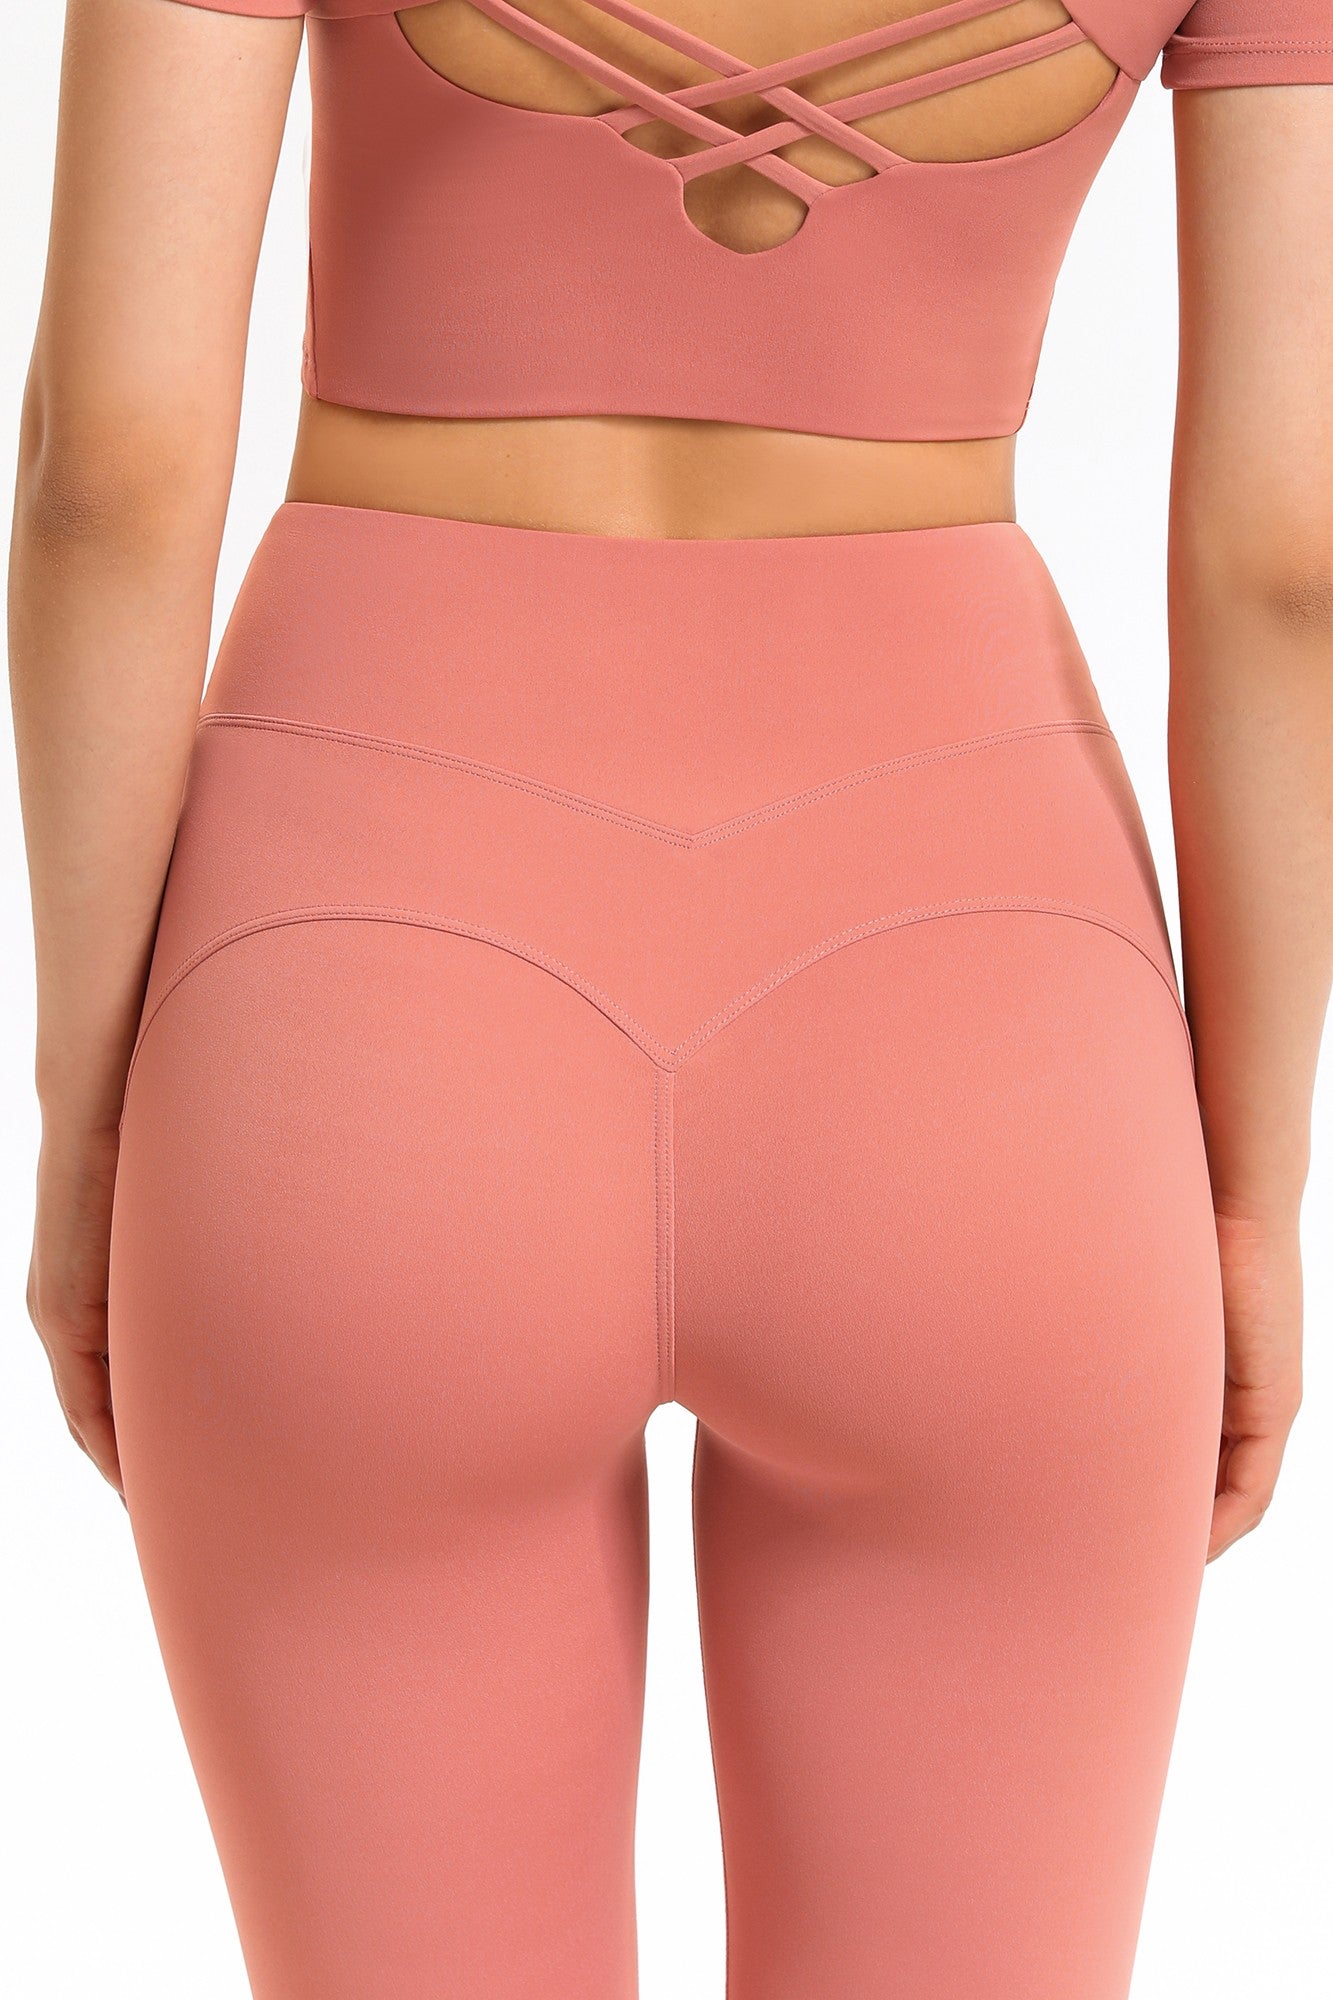 Buttersoft Scrunch Leggings with Drawstring